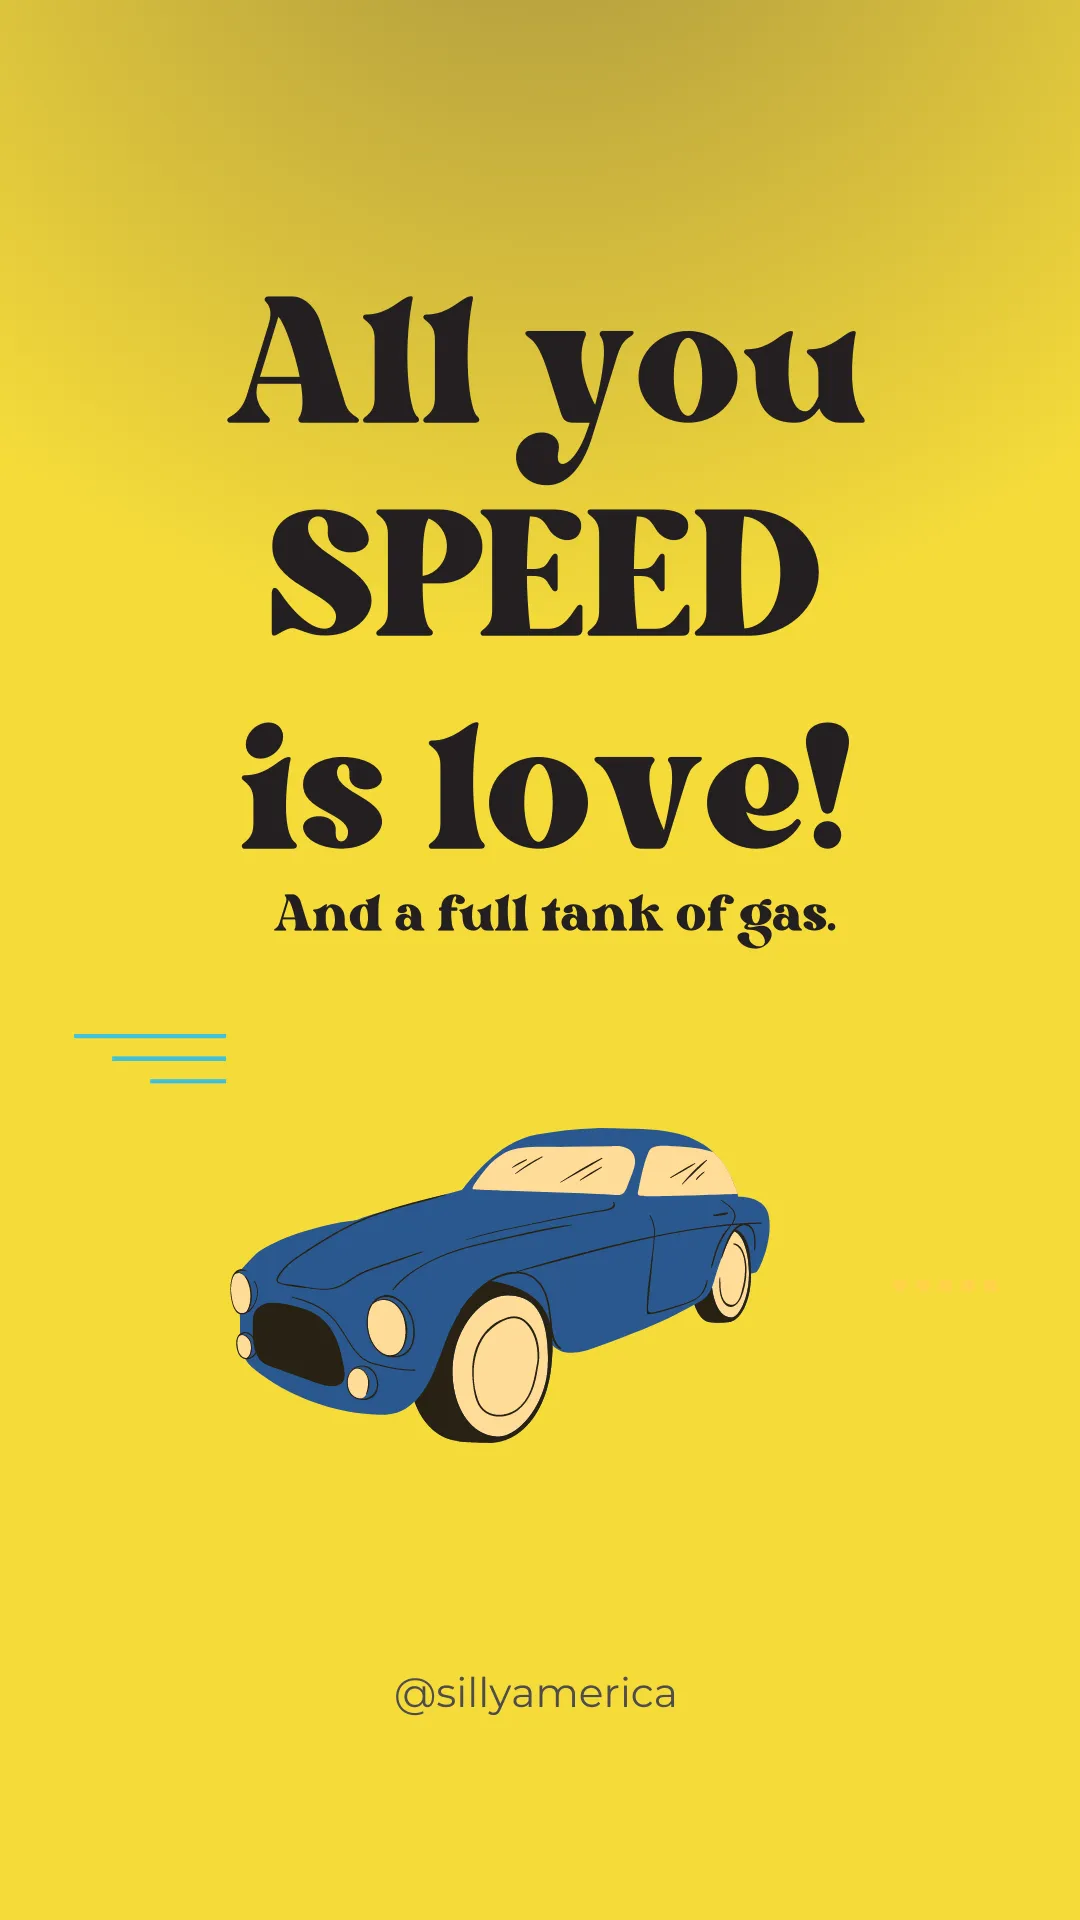 All you SPEED is love! And a full tank of gas. - Road Trip Puns